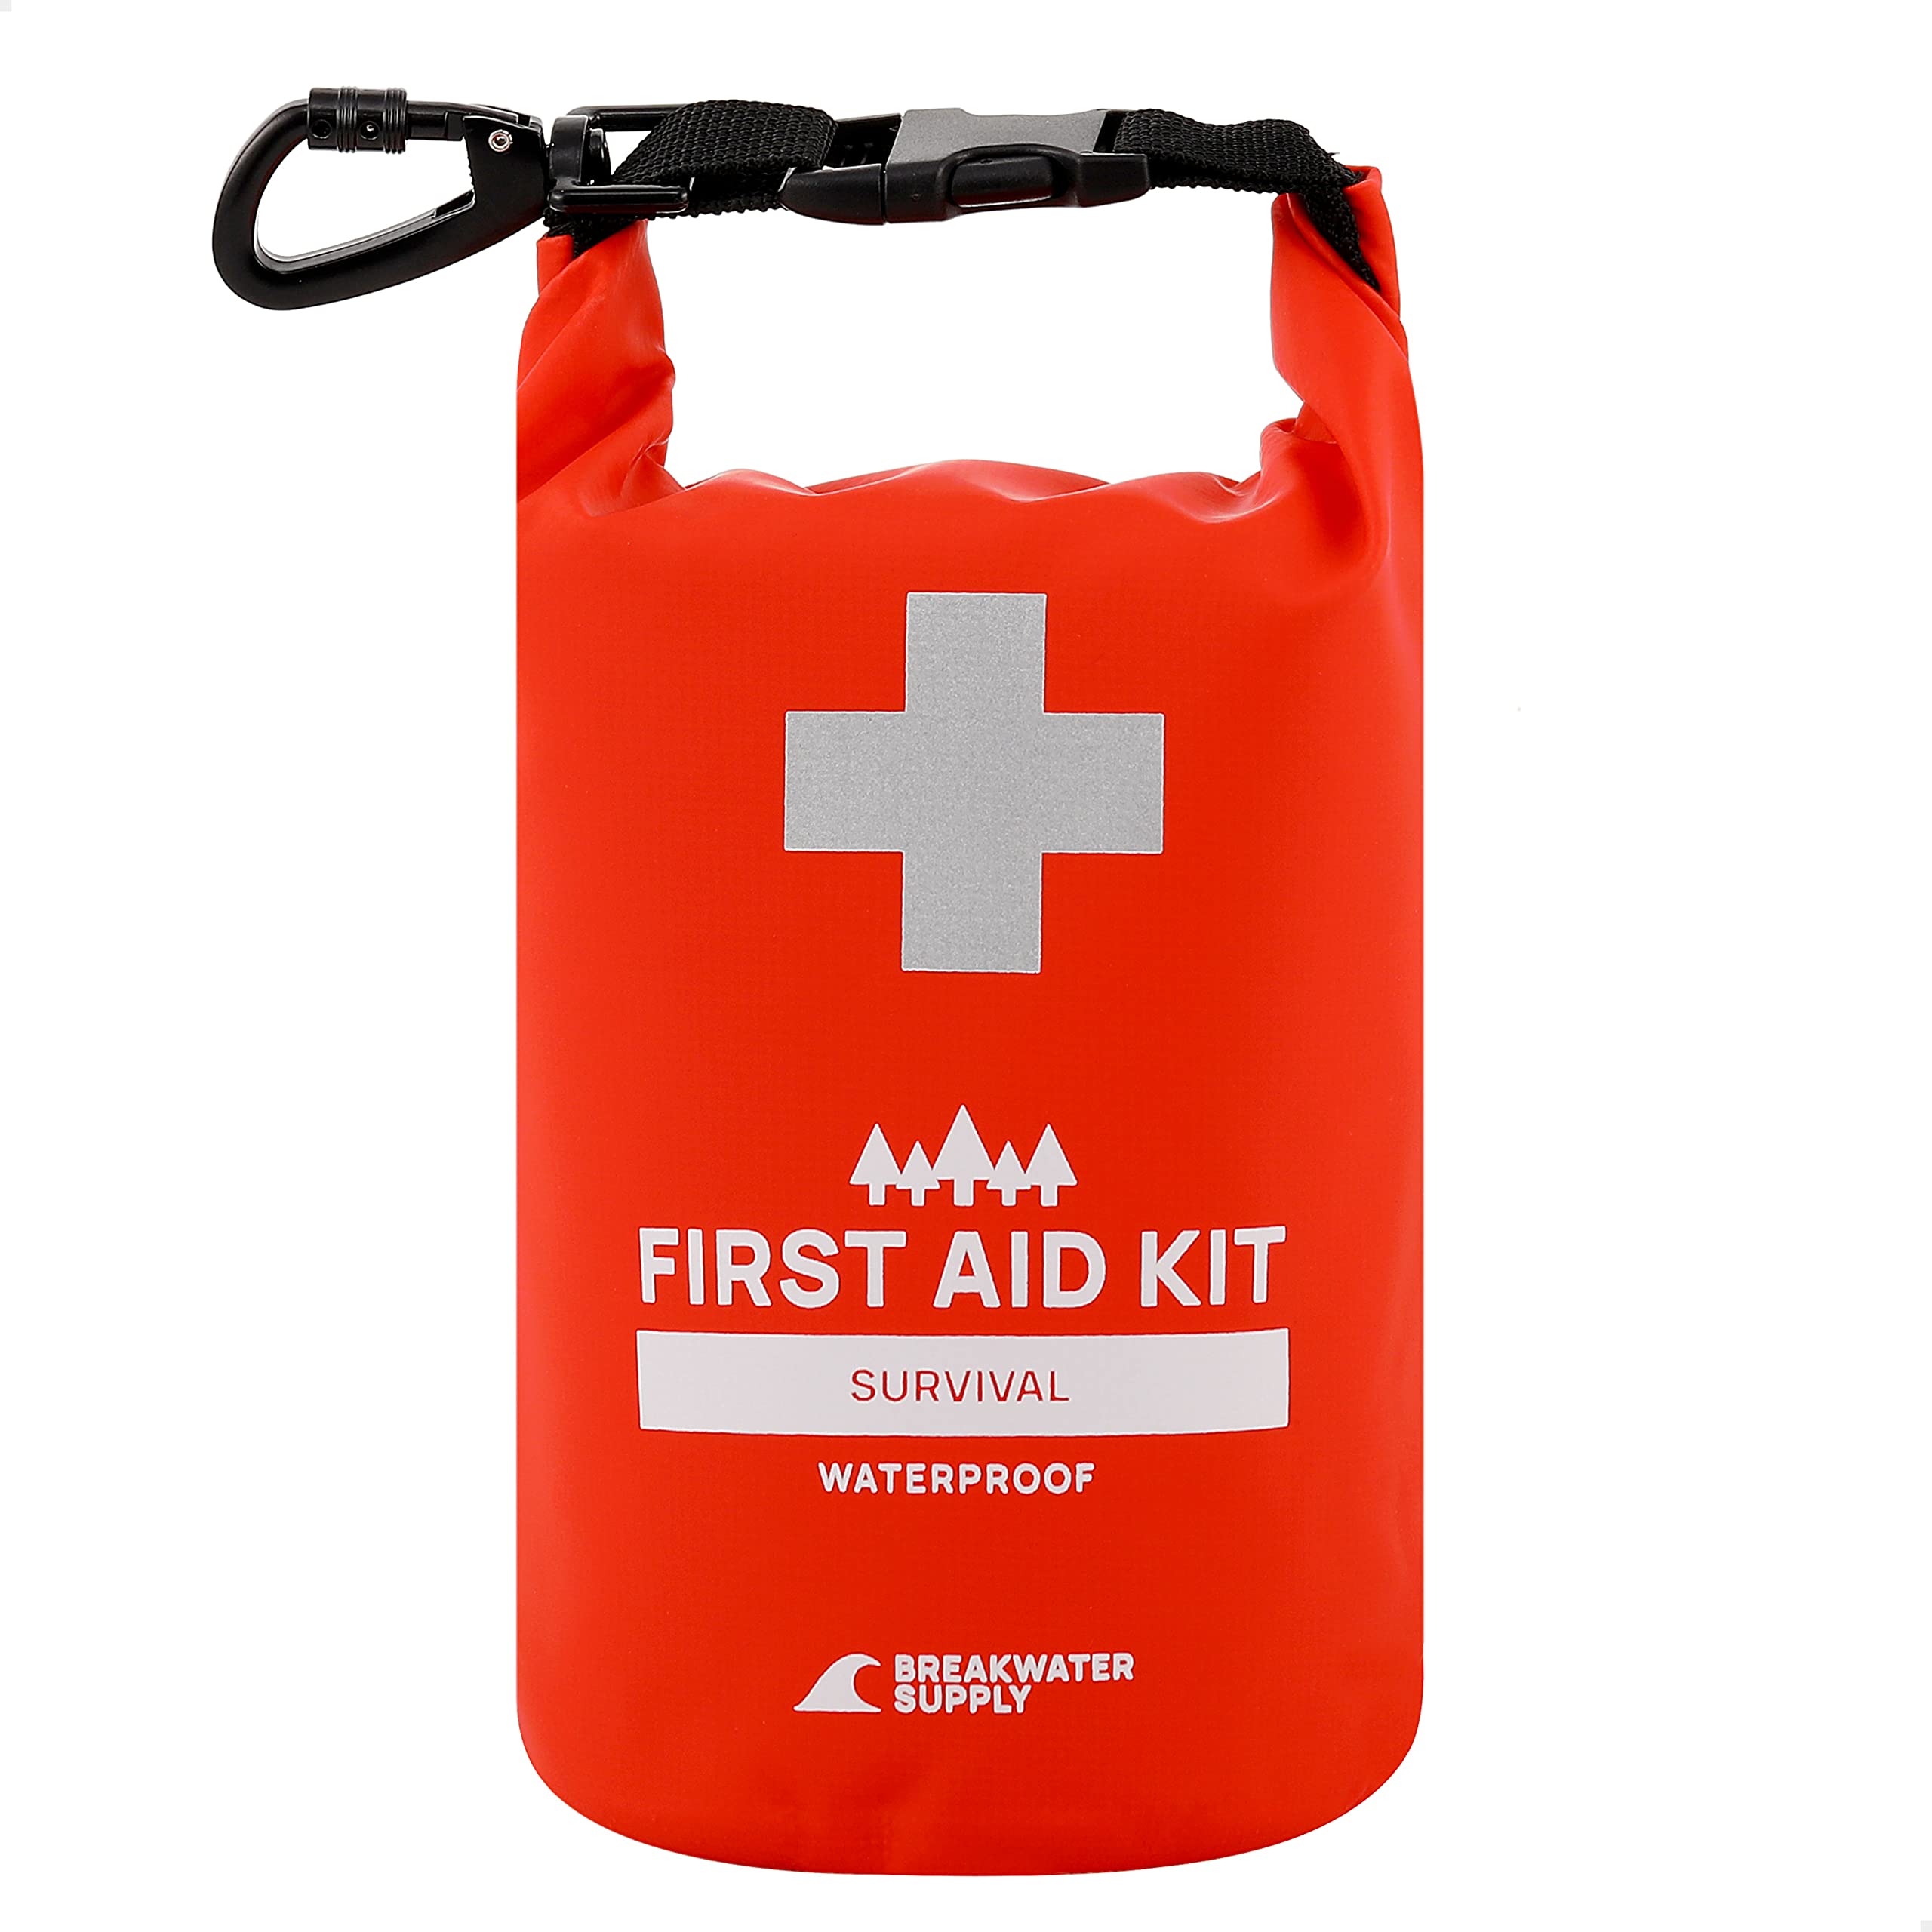 Breakwater Supply Waterproof First Aid Kit Dry Bag Bug Out Bag, Emergency Survival  Supplies for Boating, Camping, Kayaking + Heavy-Duty Carabiner, Floating,  Reflective, Lightweight First Aid Survival Kit (Red)